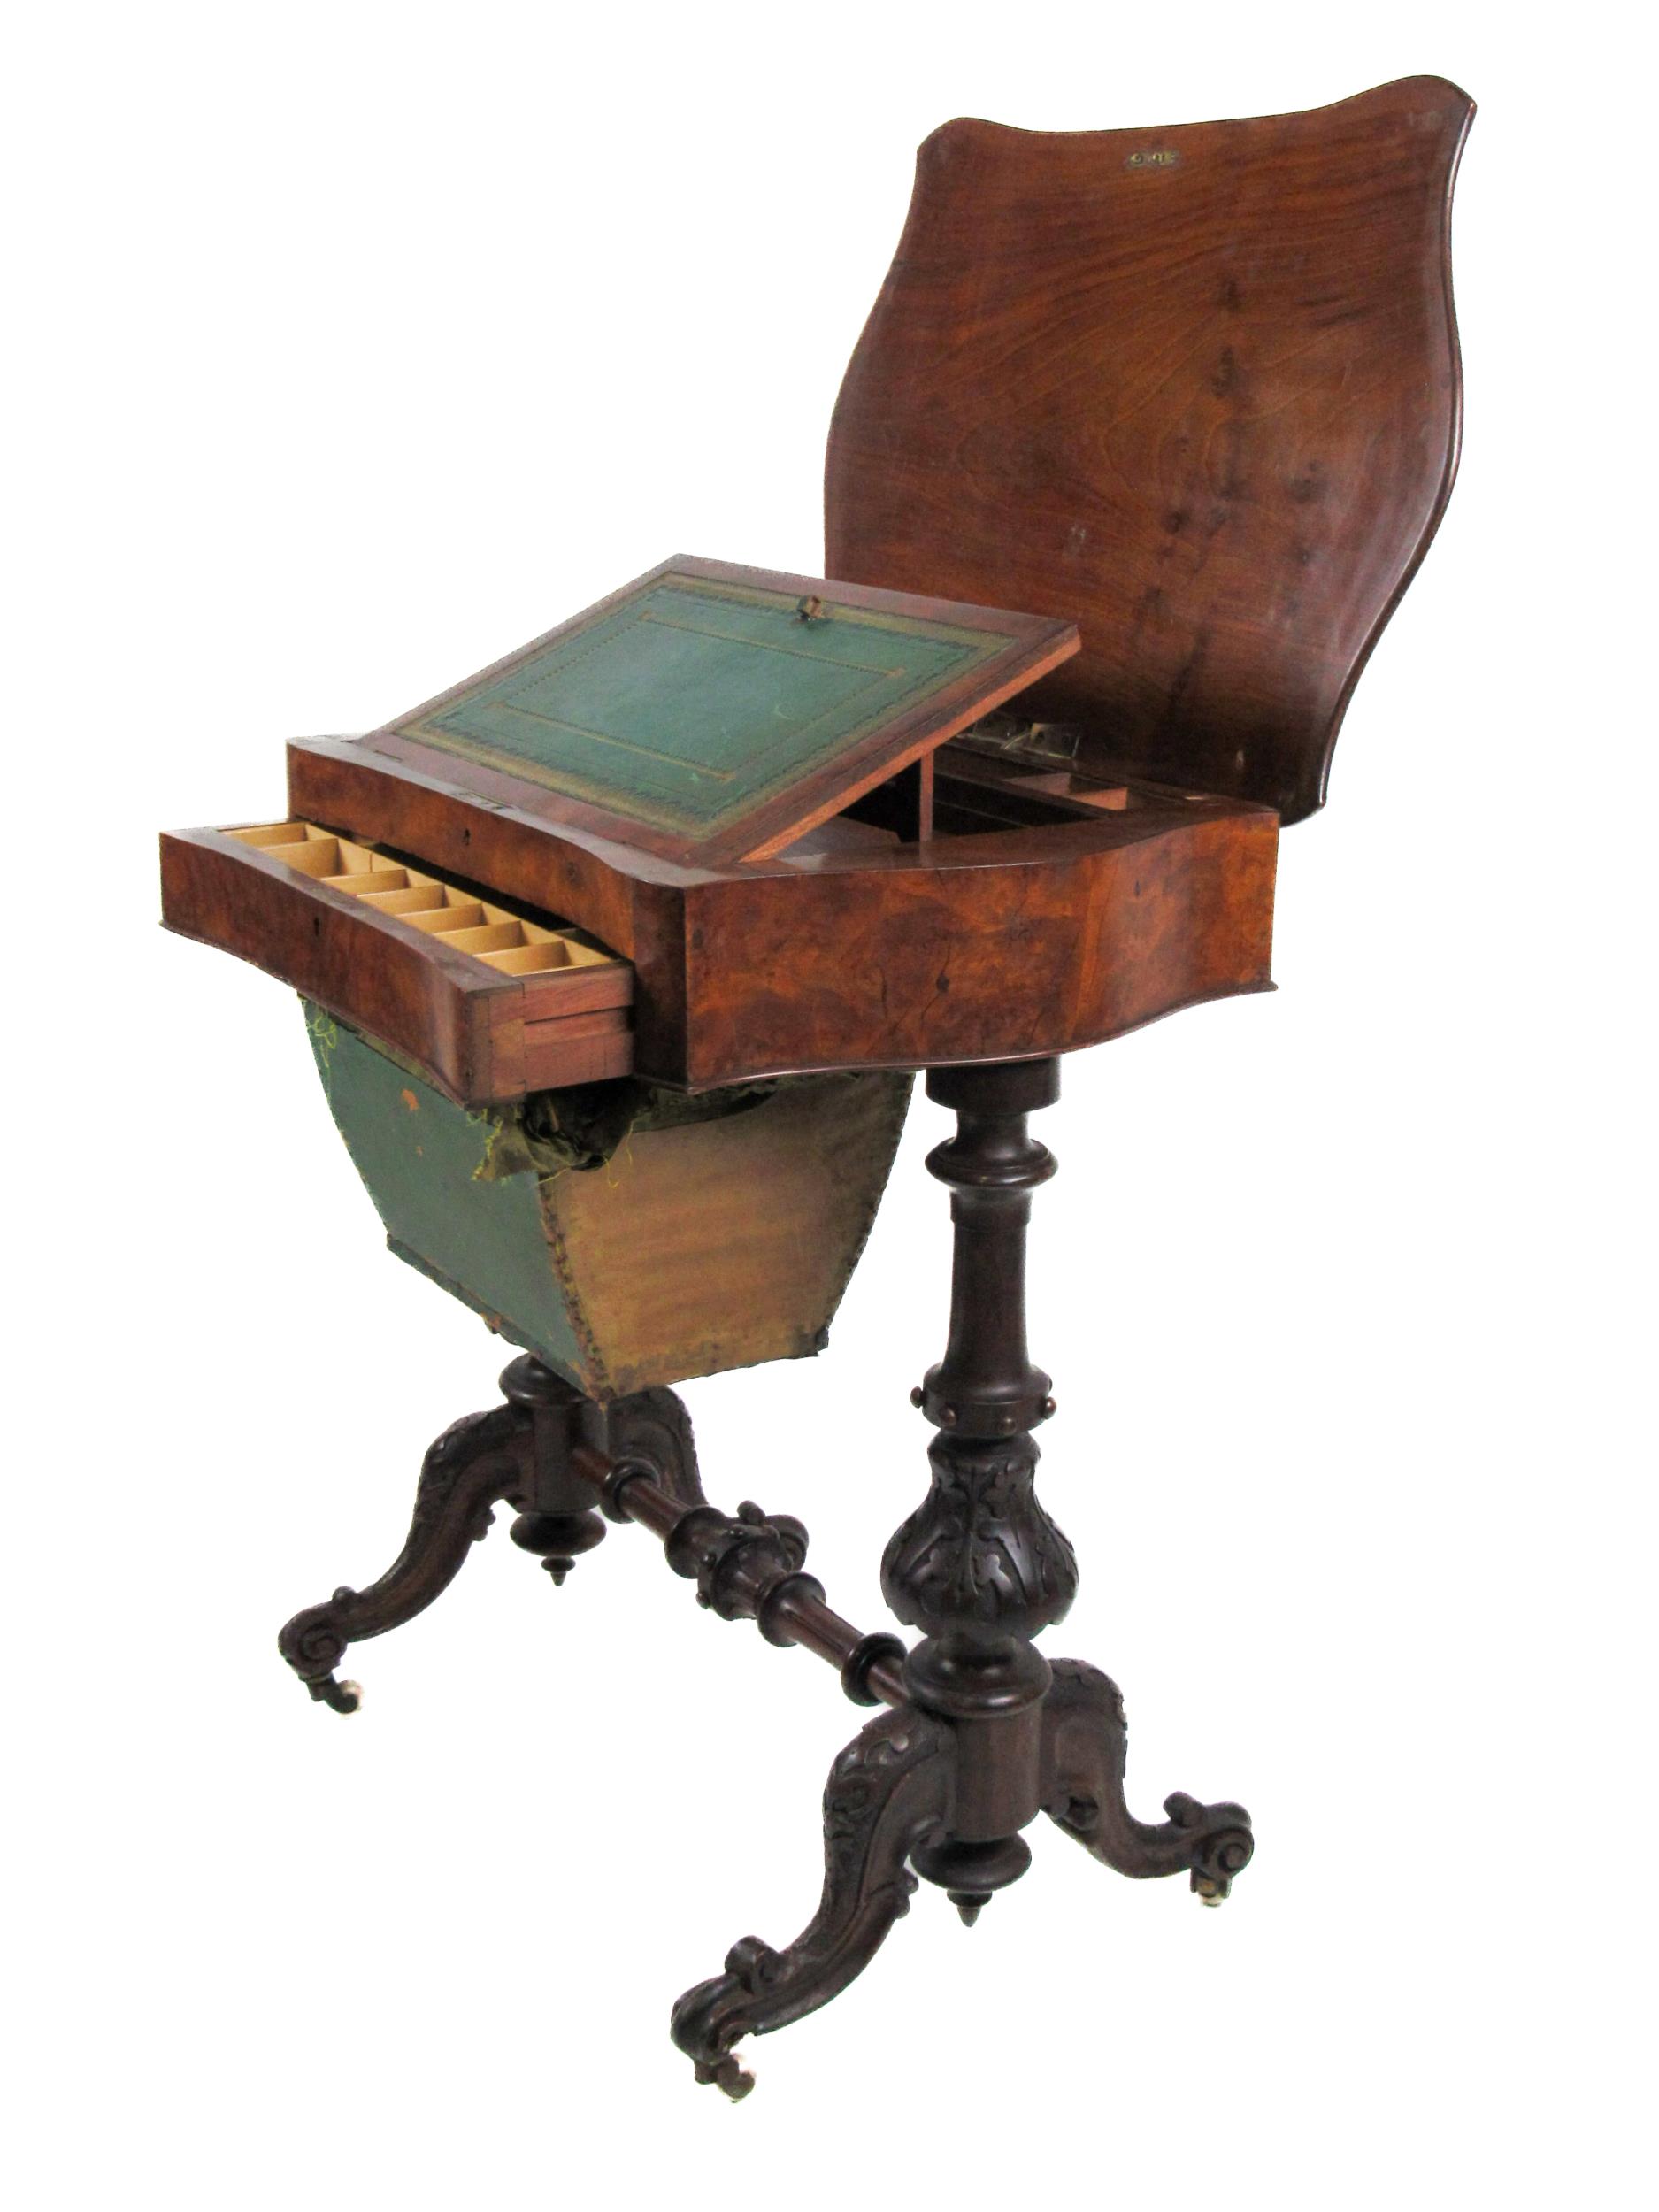 A Victorian serpentine shaped Ladies walnut Work / Writing Table, the hinged top opening to reveal a - Image 2 of 2